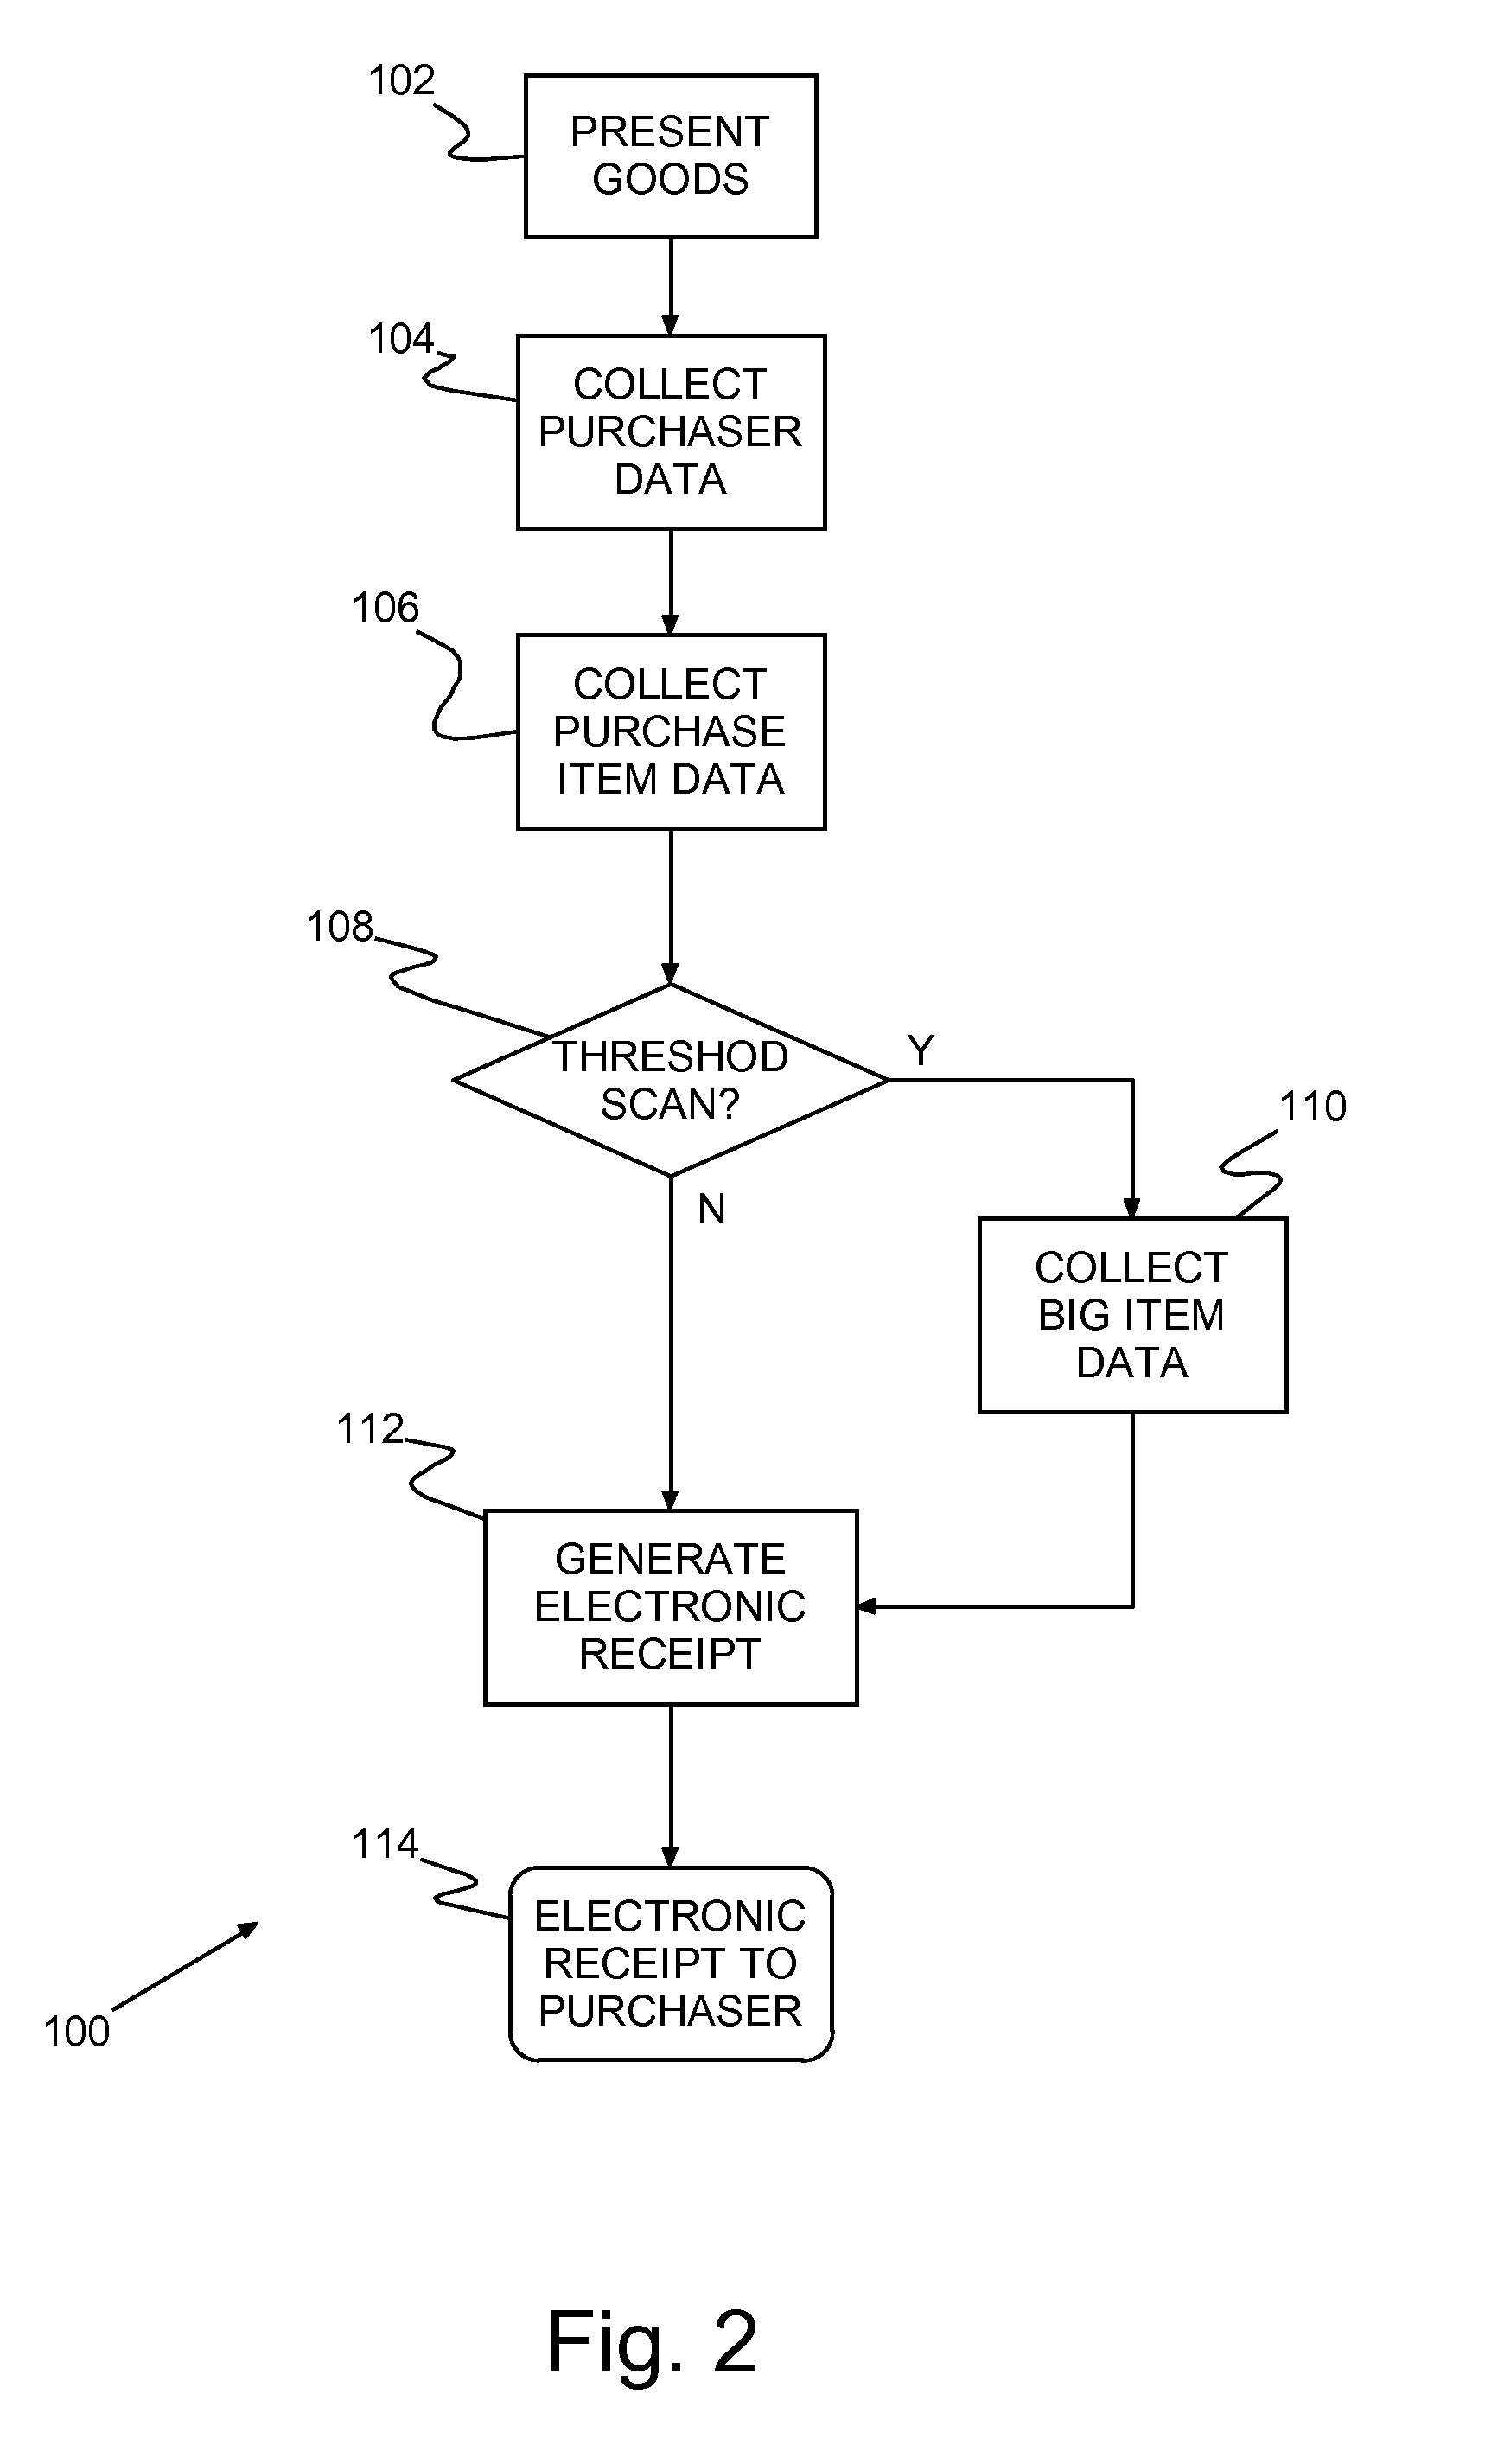 System and method of directly providing electronic receipts